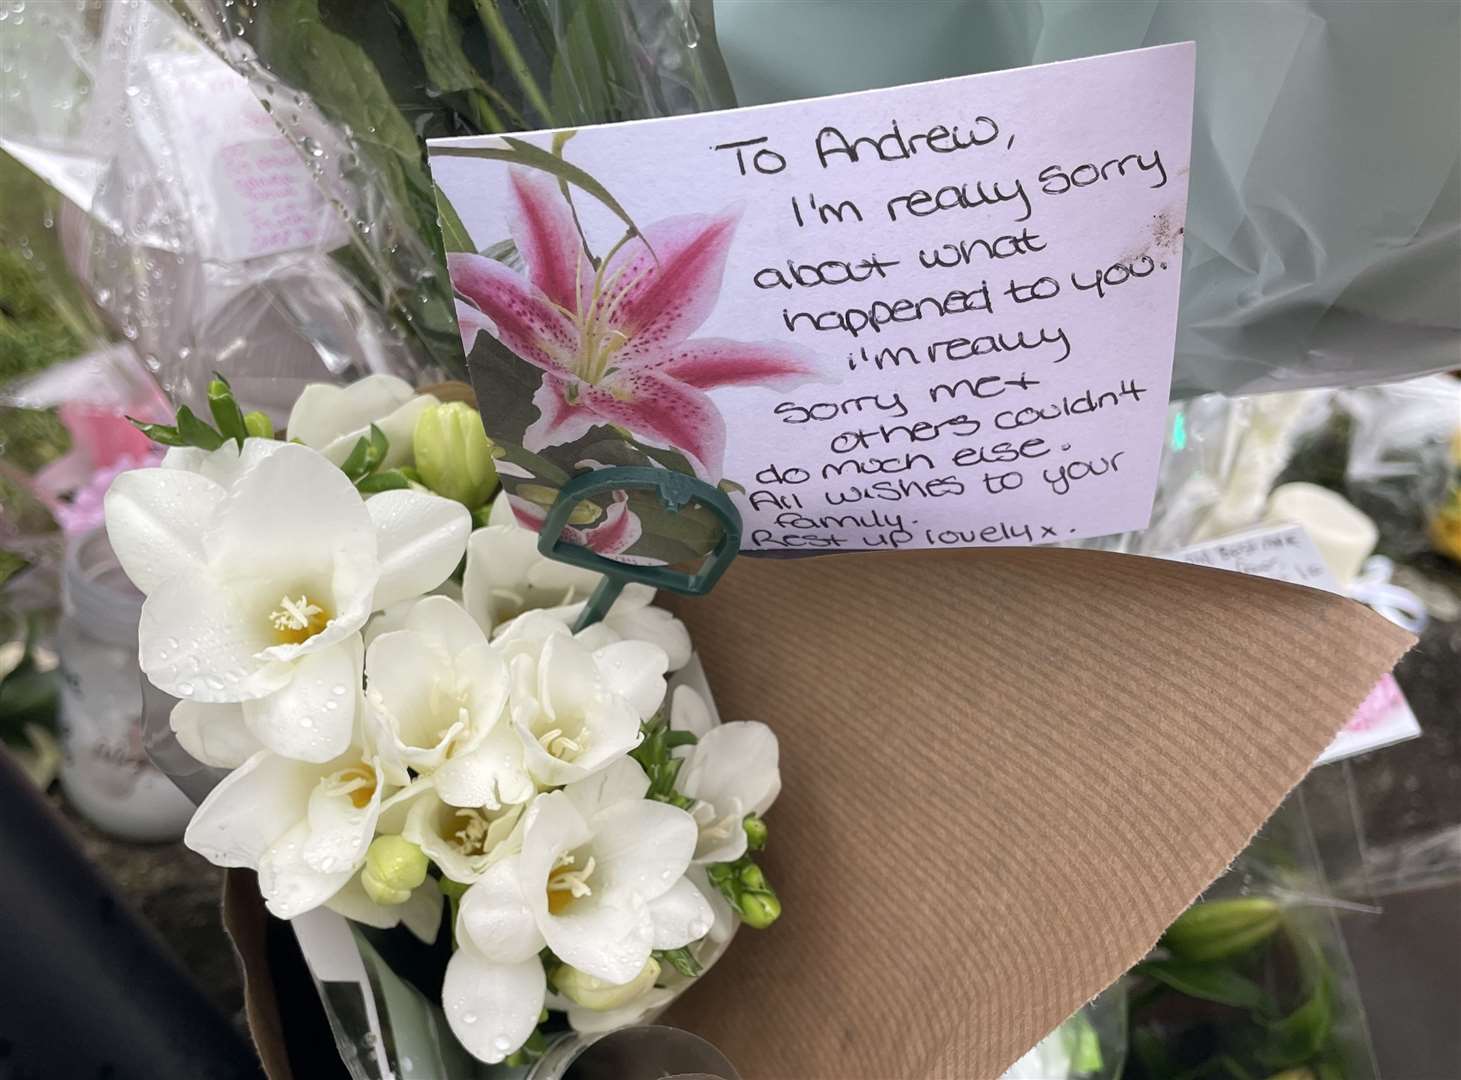 Flowers and messages were left following the crash